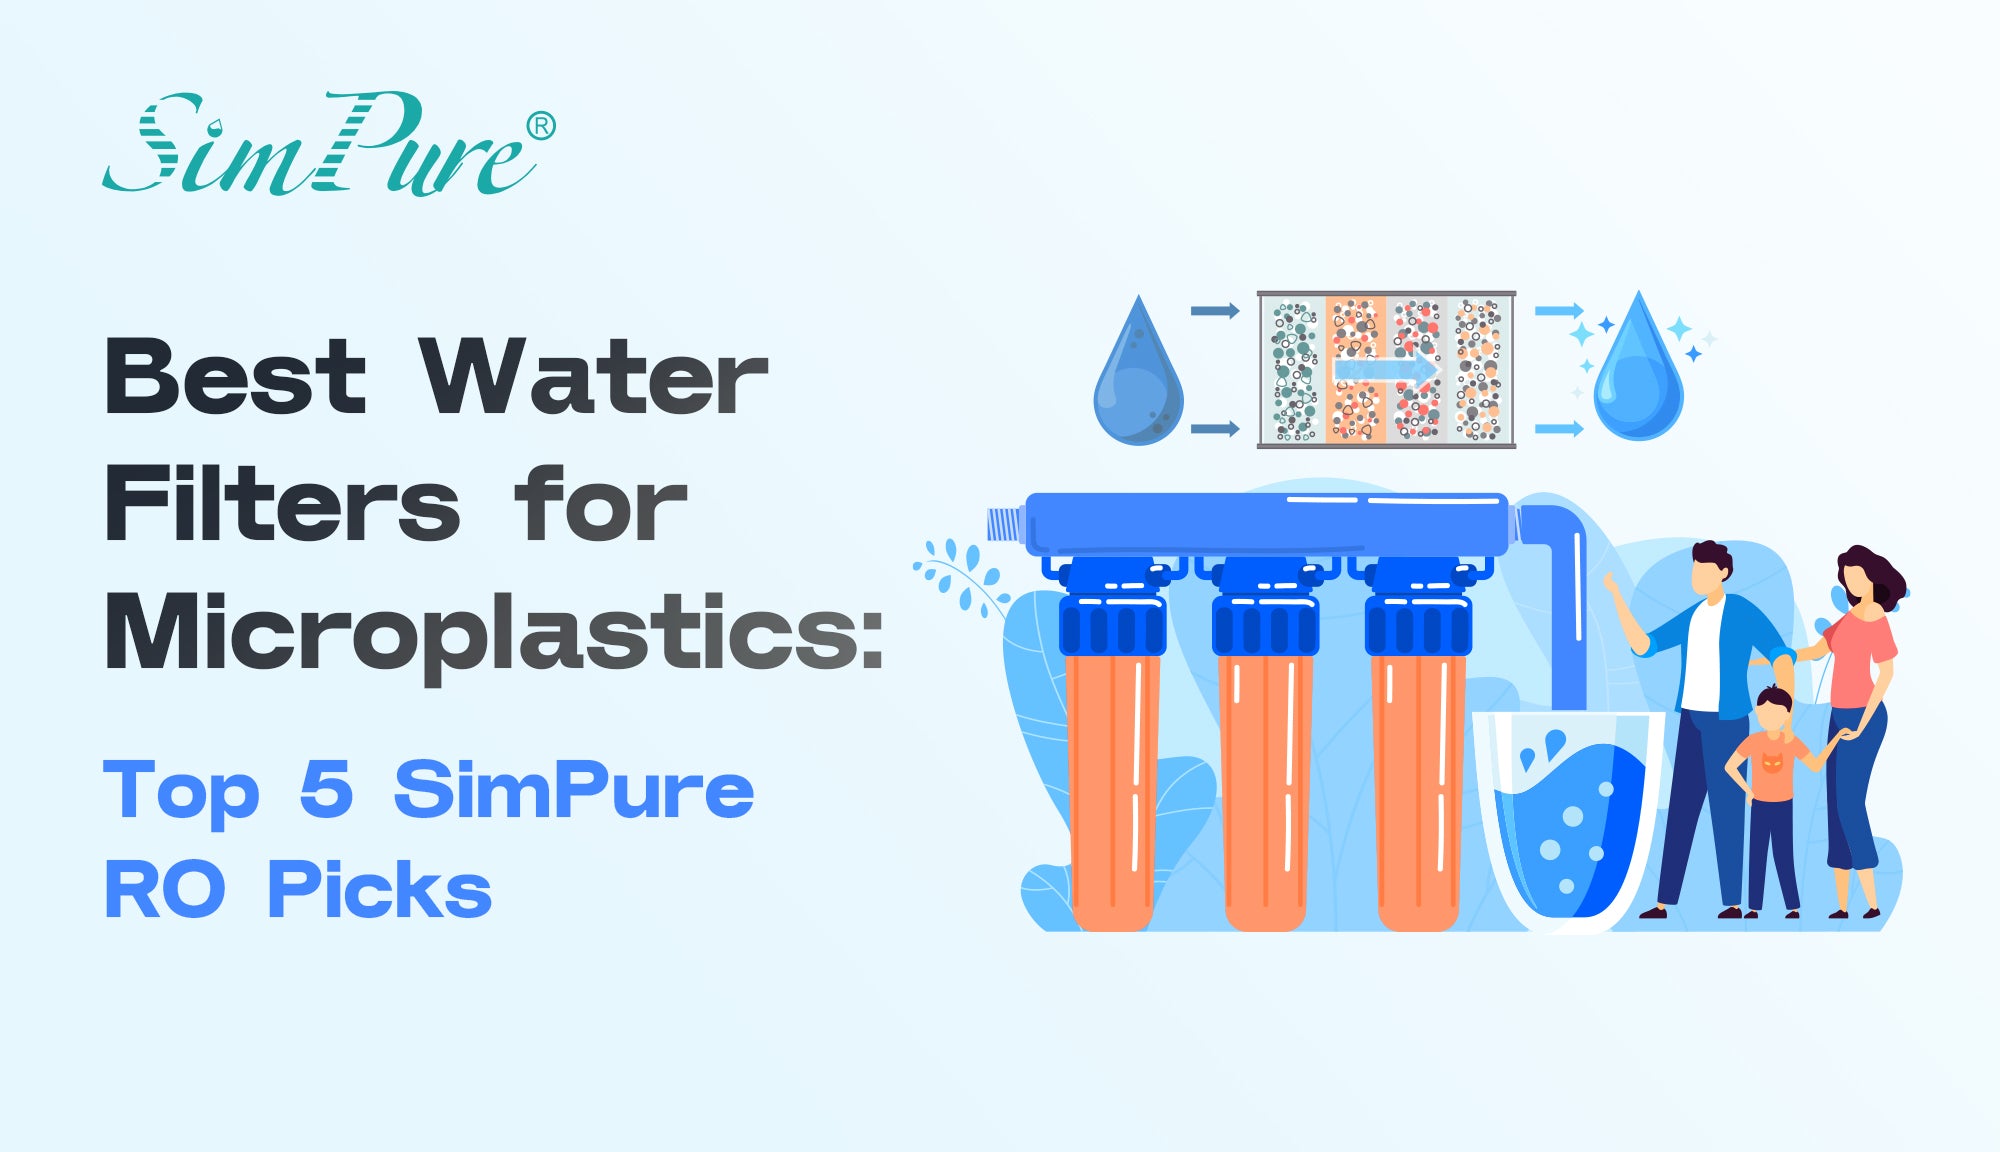 Best Water Filters for Microplastics